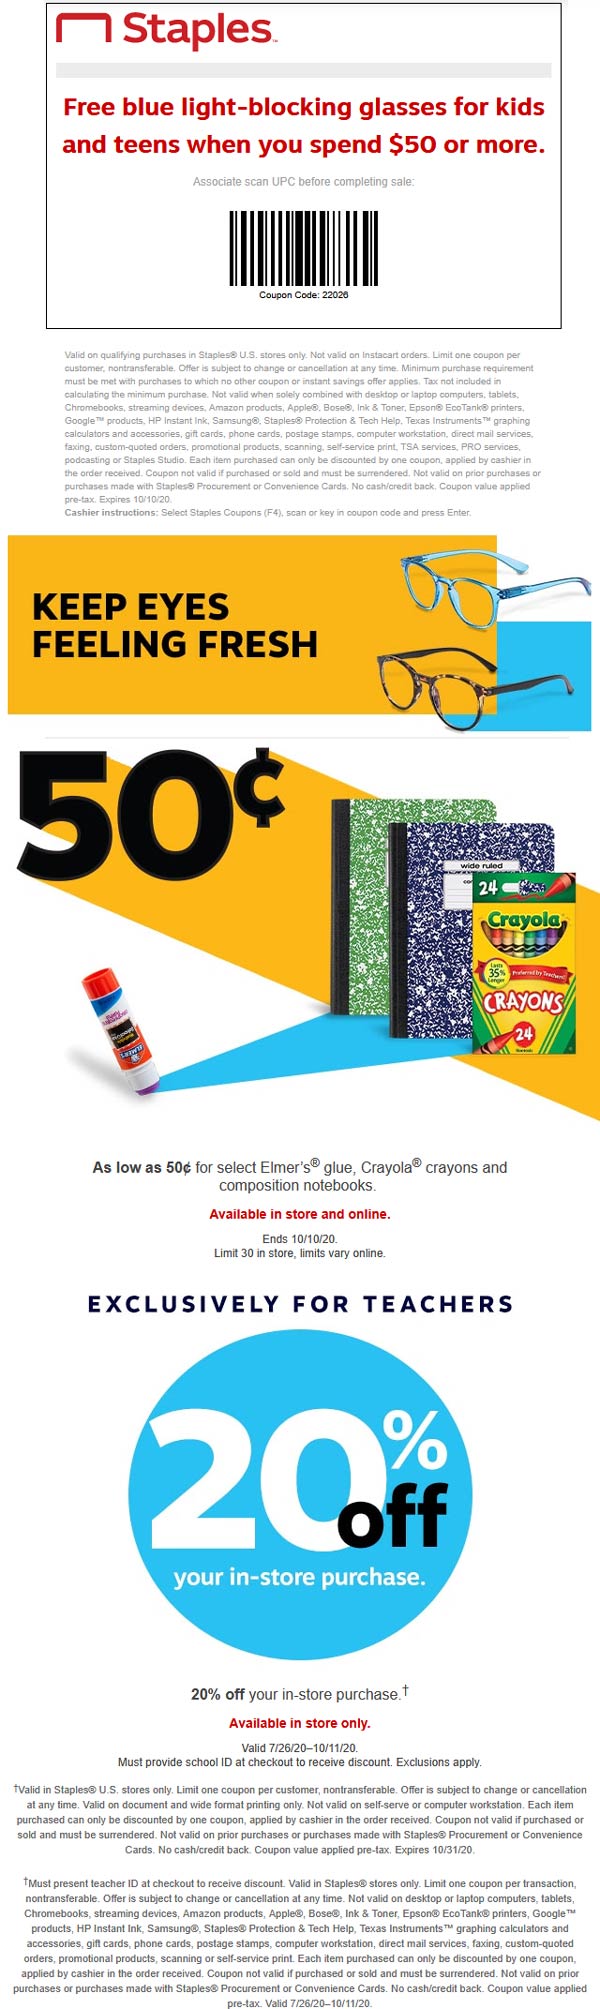 Staples stores Coupon  Free blue light glasses on $50 spent & .50 cent Crayola and Elmers glue at Staples #staples 